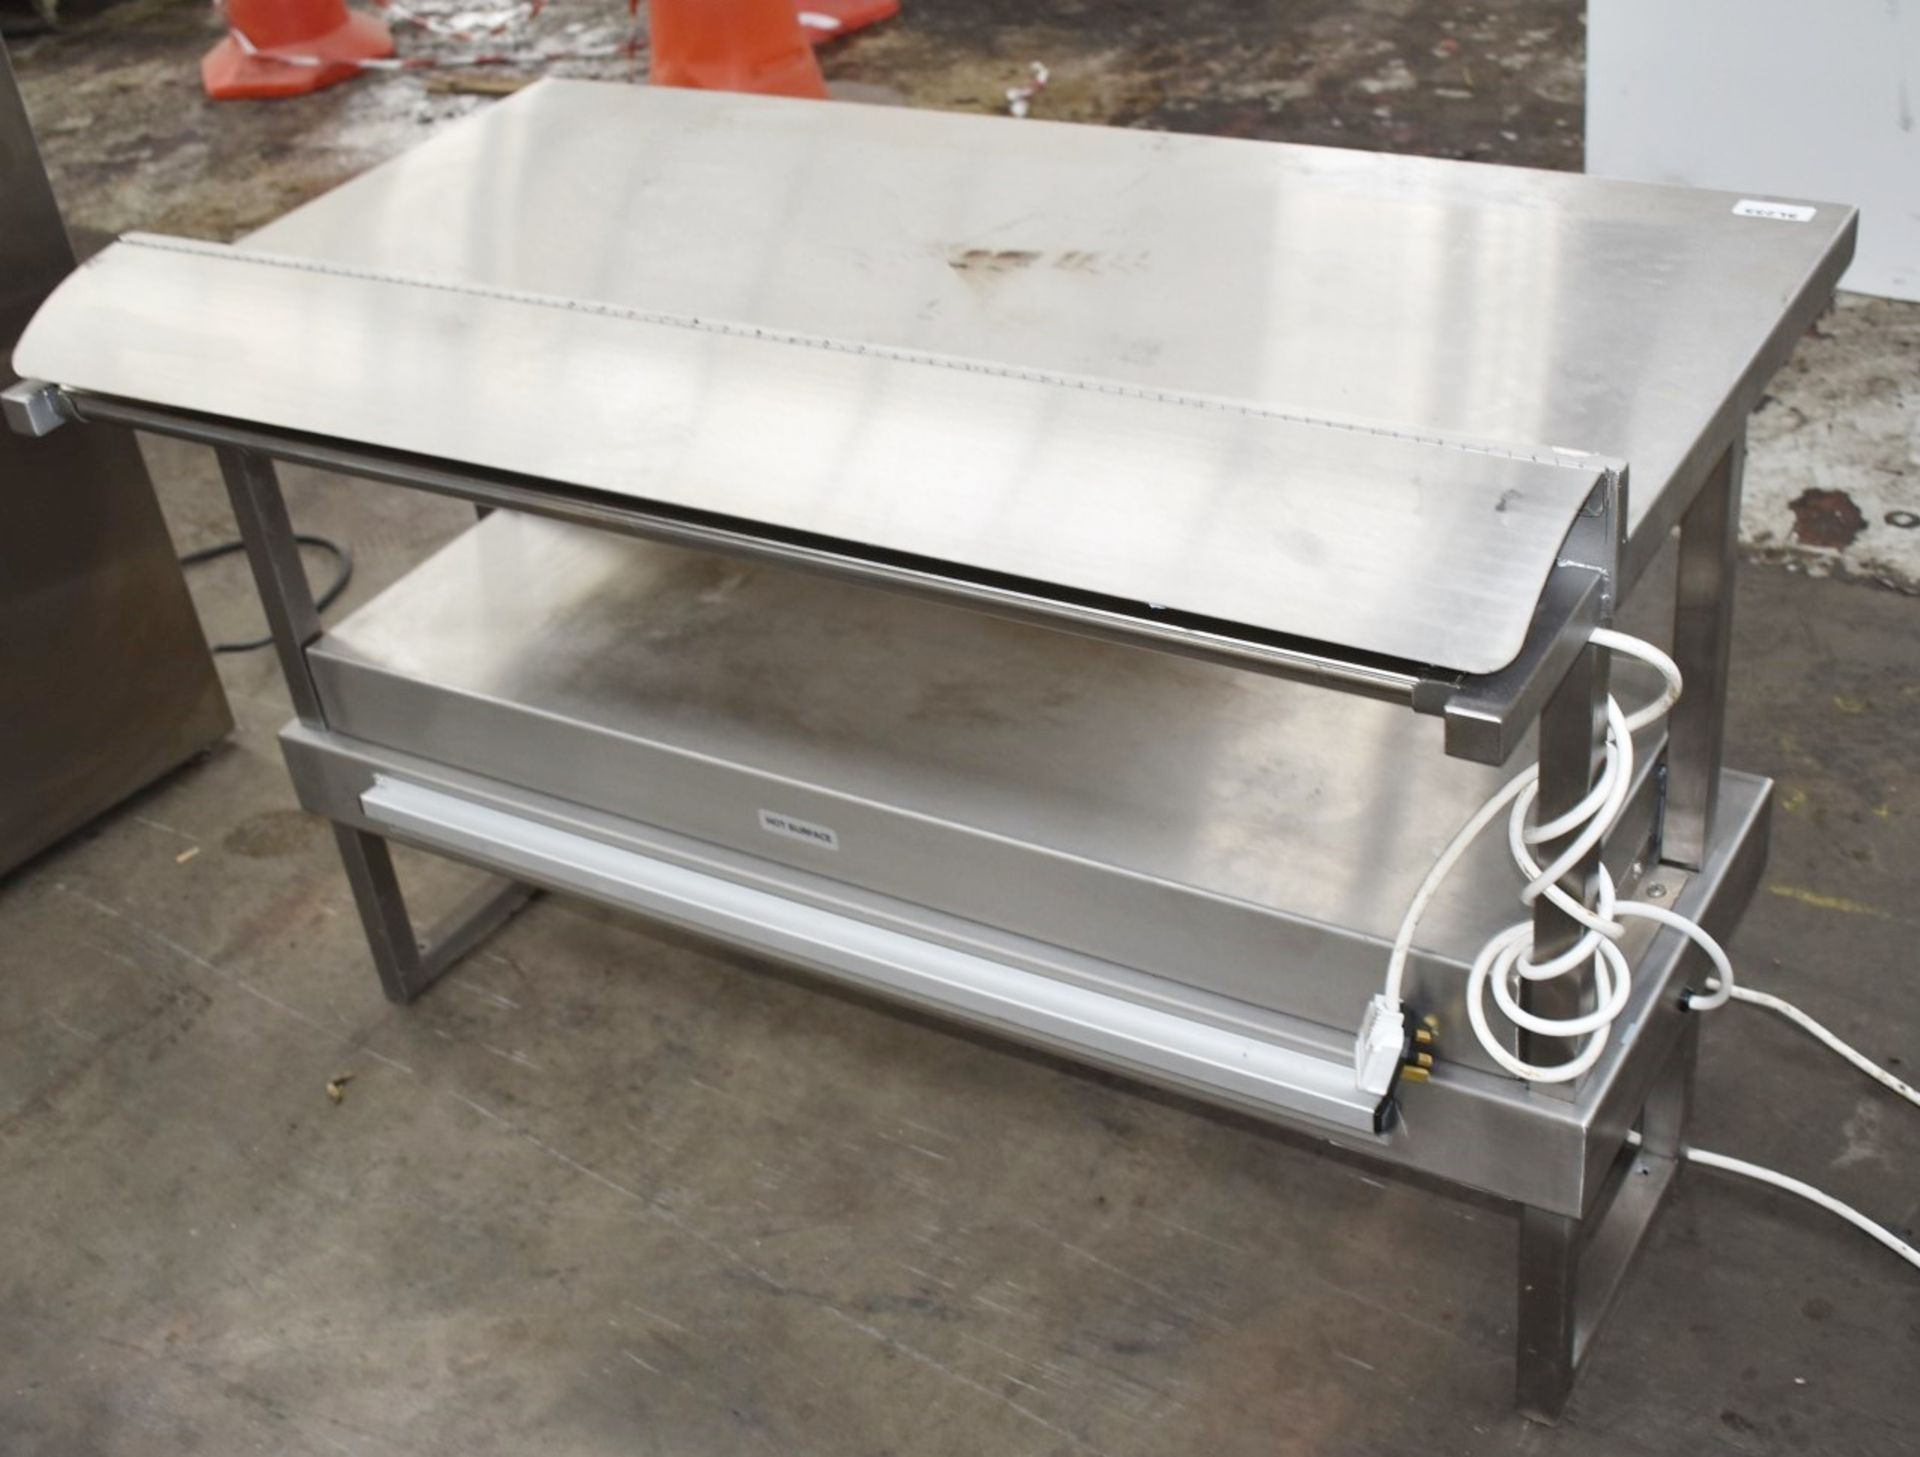 1 x Stainless Steel Bench Mounted Passthrough Food Warmer With Ticket Rails Ref SL255 WH4 - - Image 2 of 6